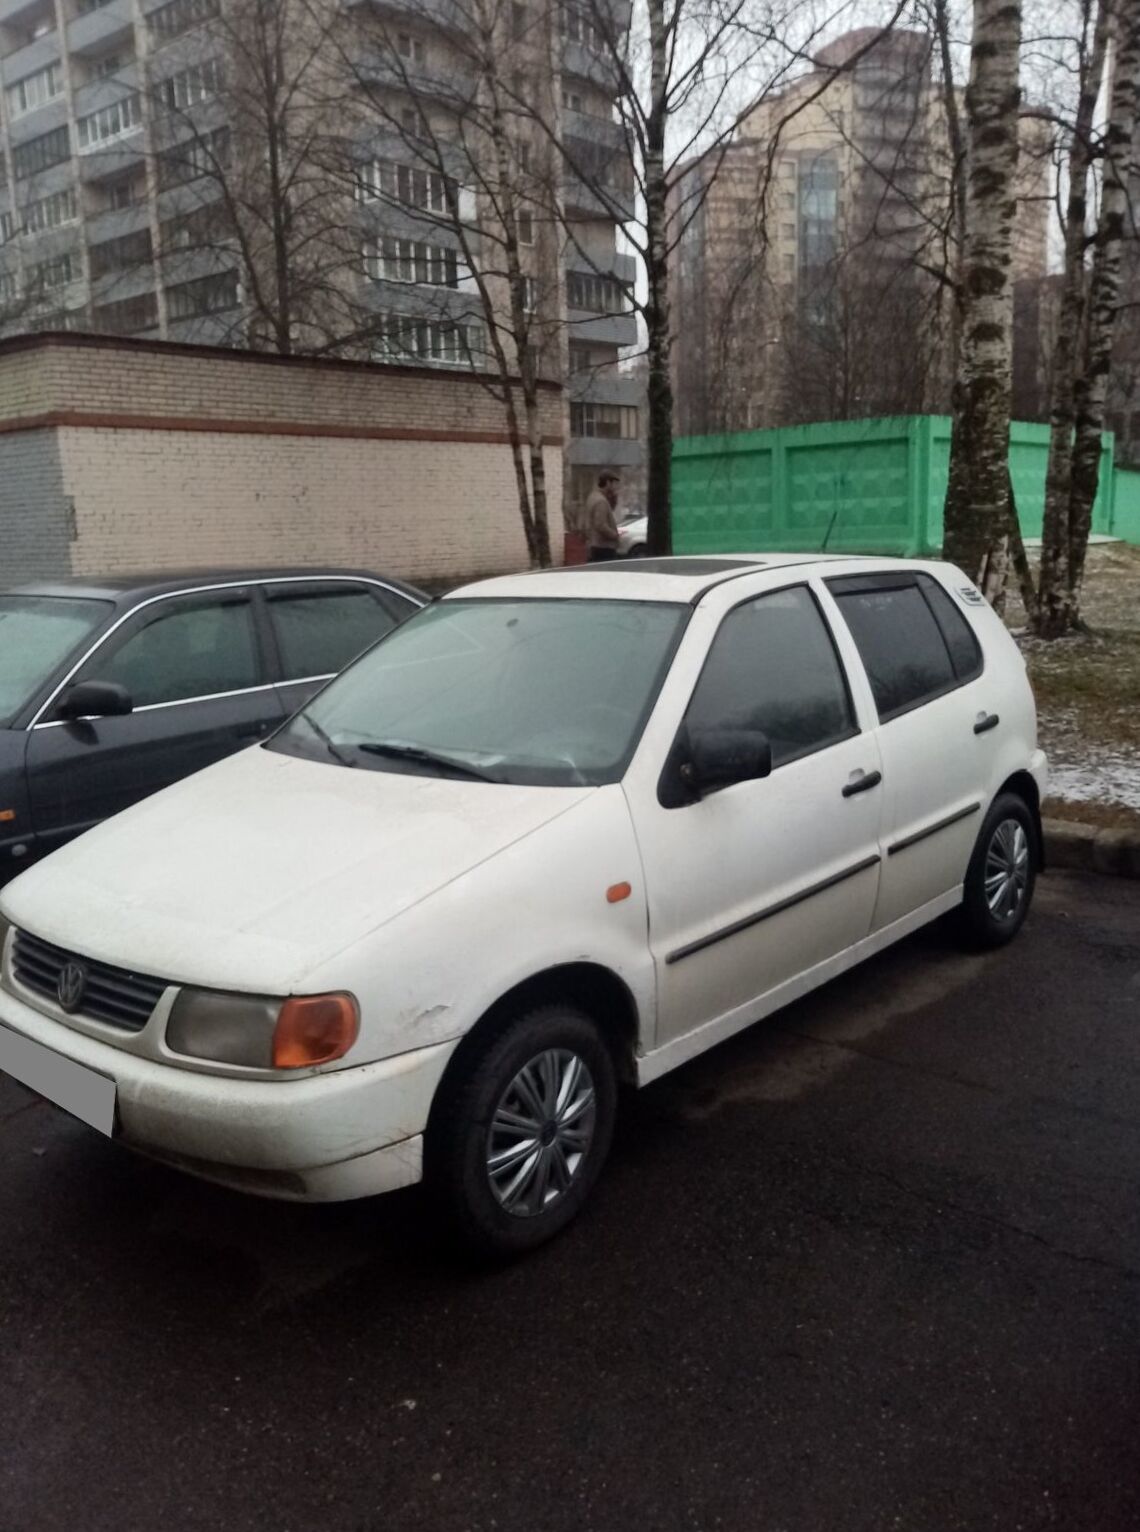 1994 Volkswagen Polo III 6N1 MT 5dr. (45 Hp) technical data, fuel dimensions, picture gallery